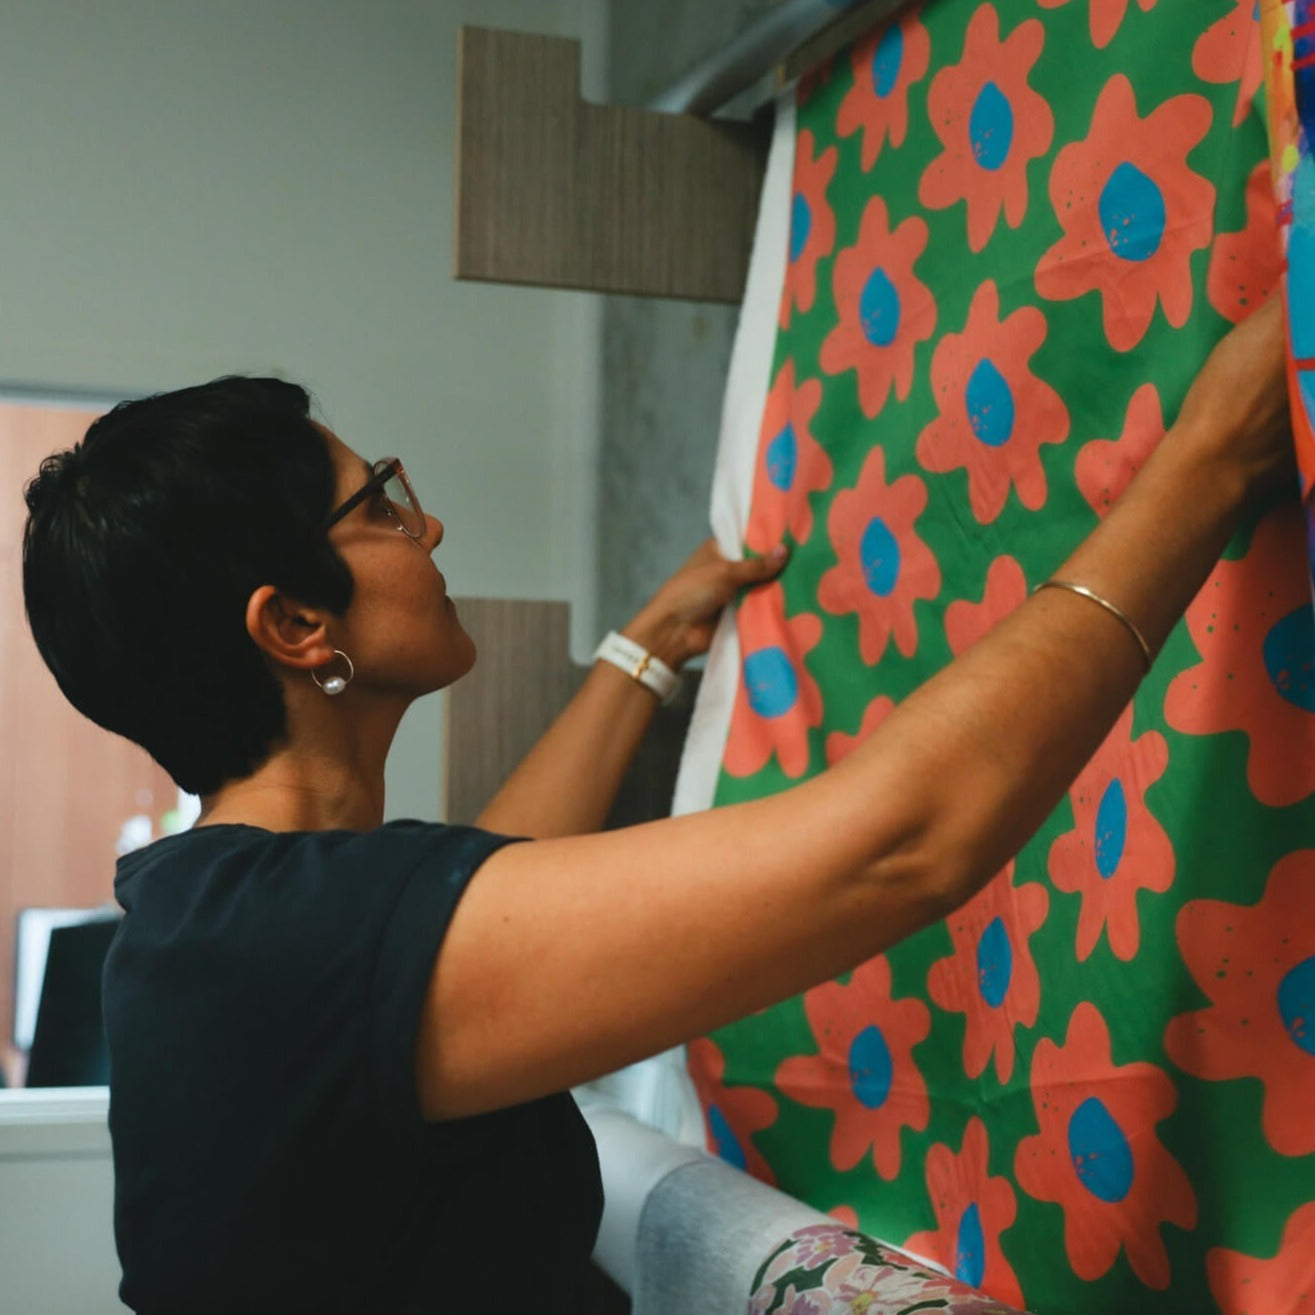 Rameez checking APPLiK digital print fabric. This artwork is bright green with orange and blue flowers.